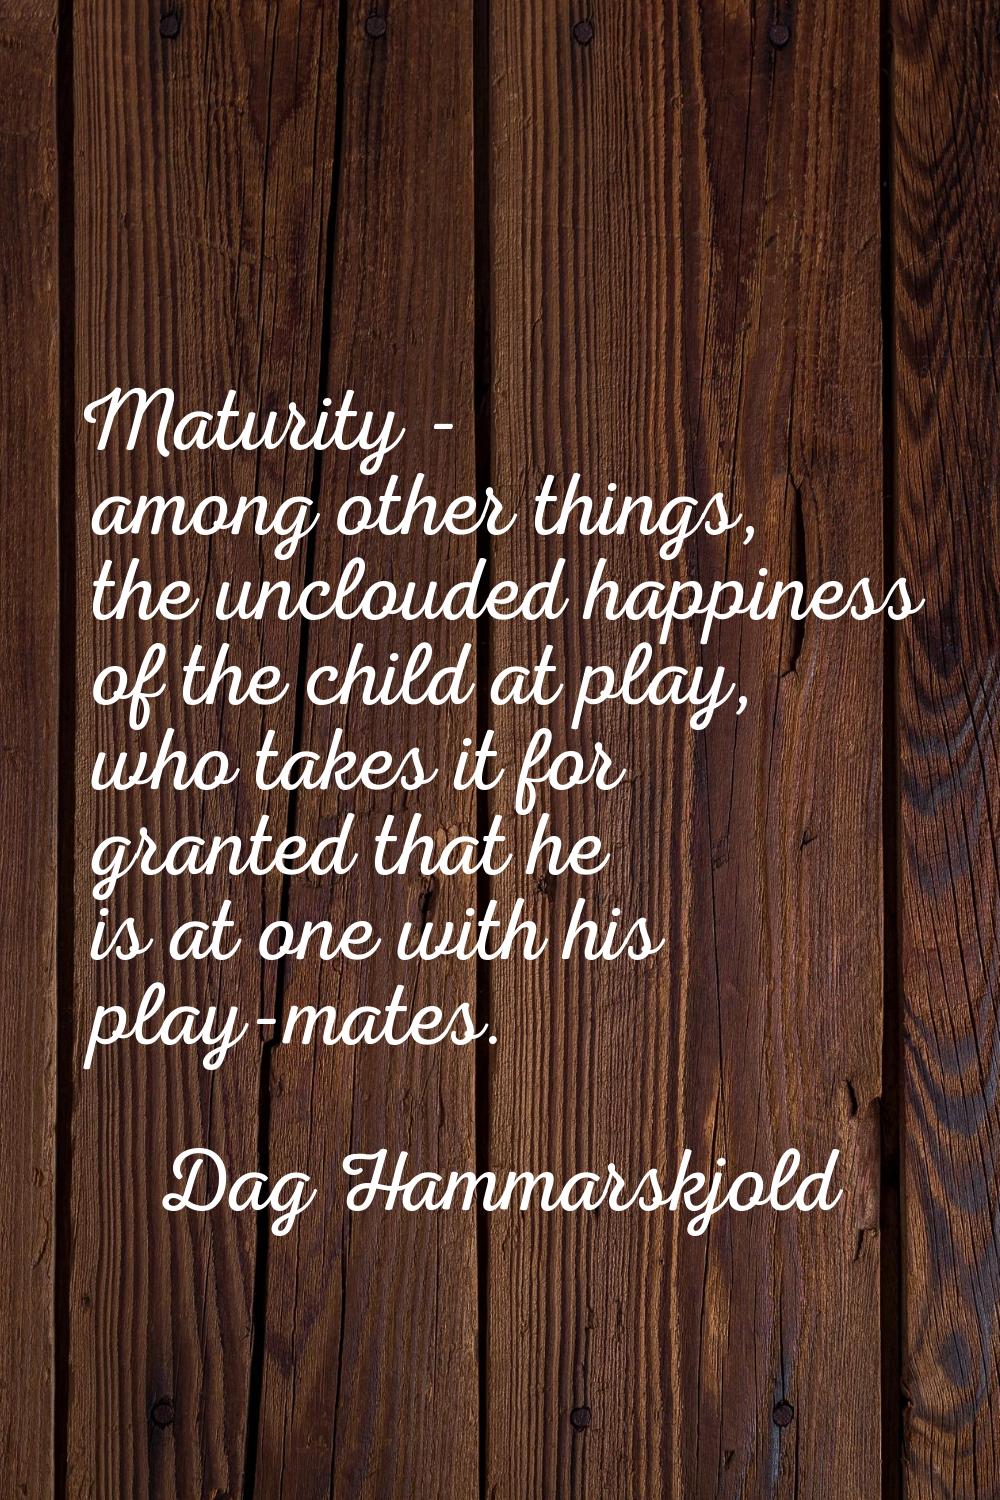 Maturity - among other things, the unclouded happiness of the child at play, who takes it for grant